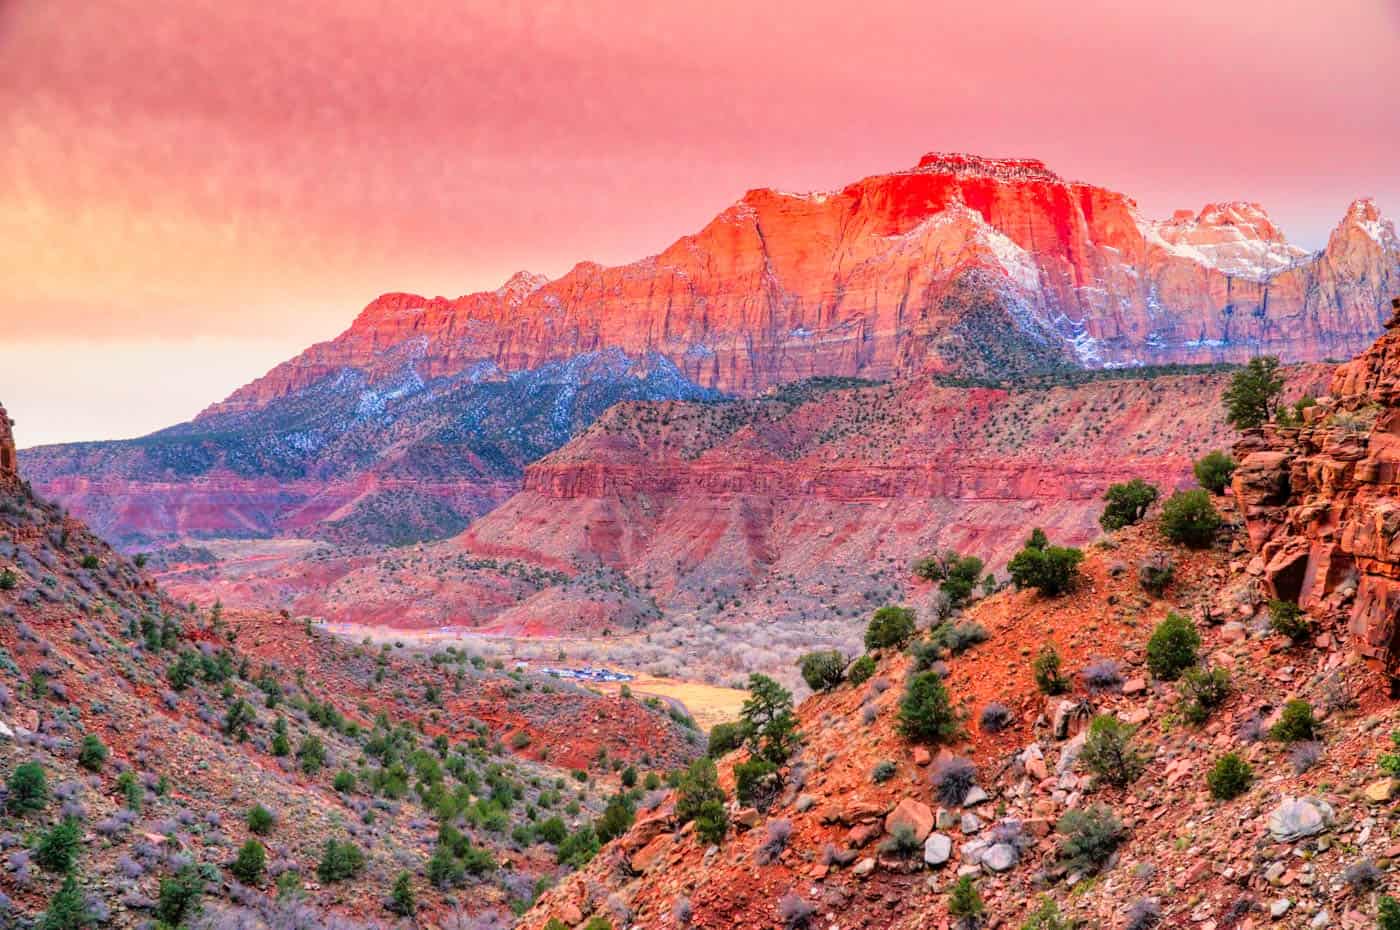 The Ultimate Zion Packing List: What to Pack for Zion National Park